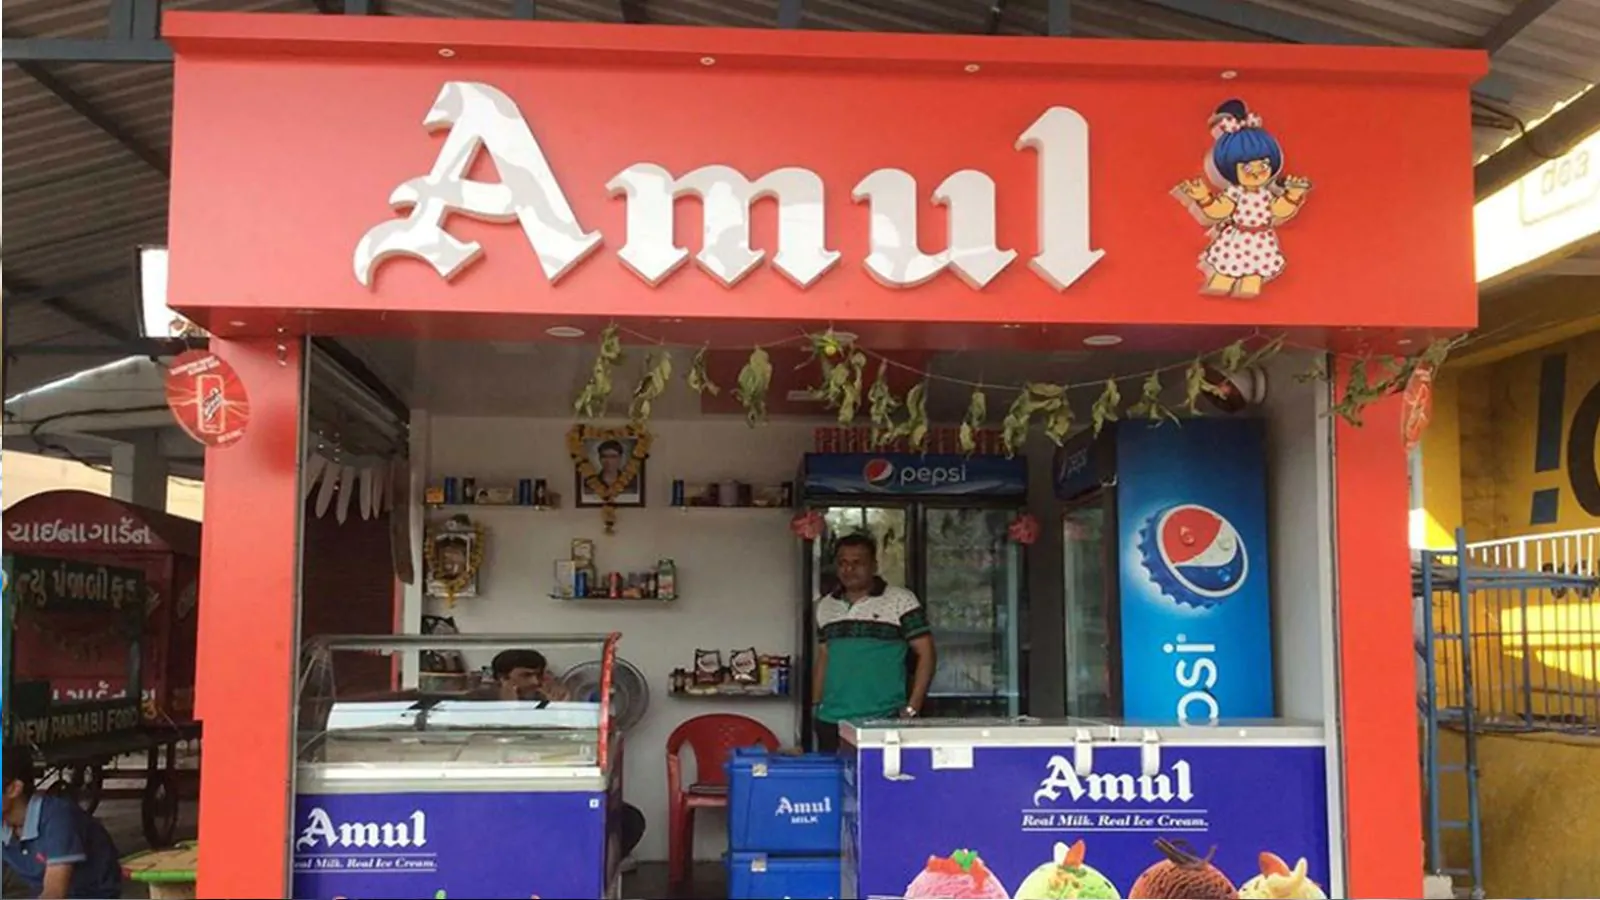 Start Amul Franchise Business with just 2 Lakh Rupees